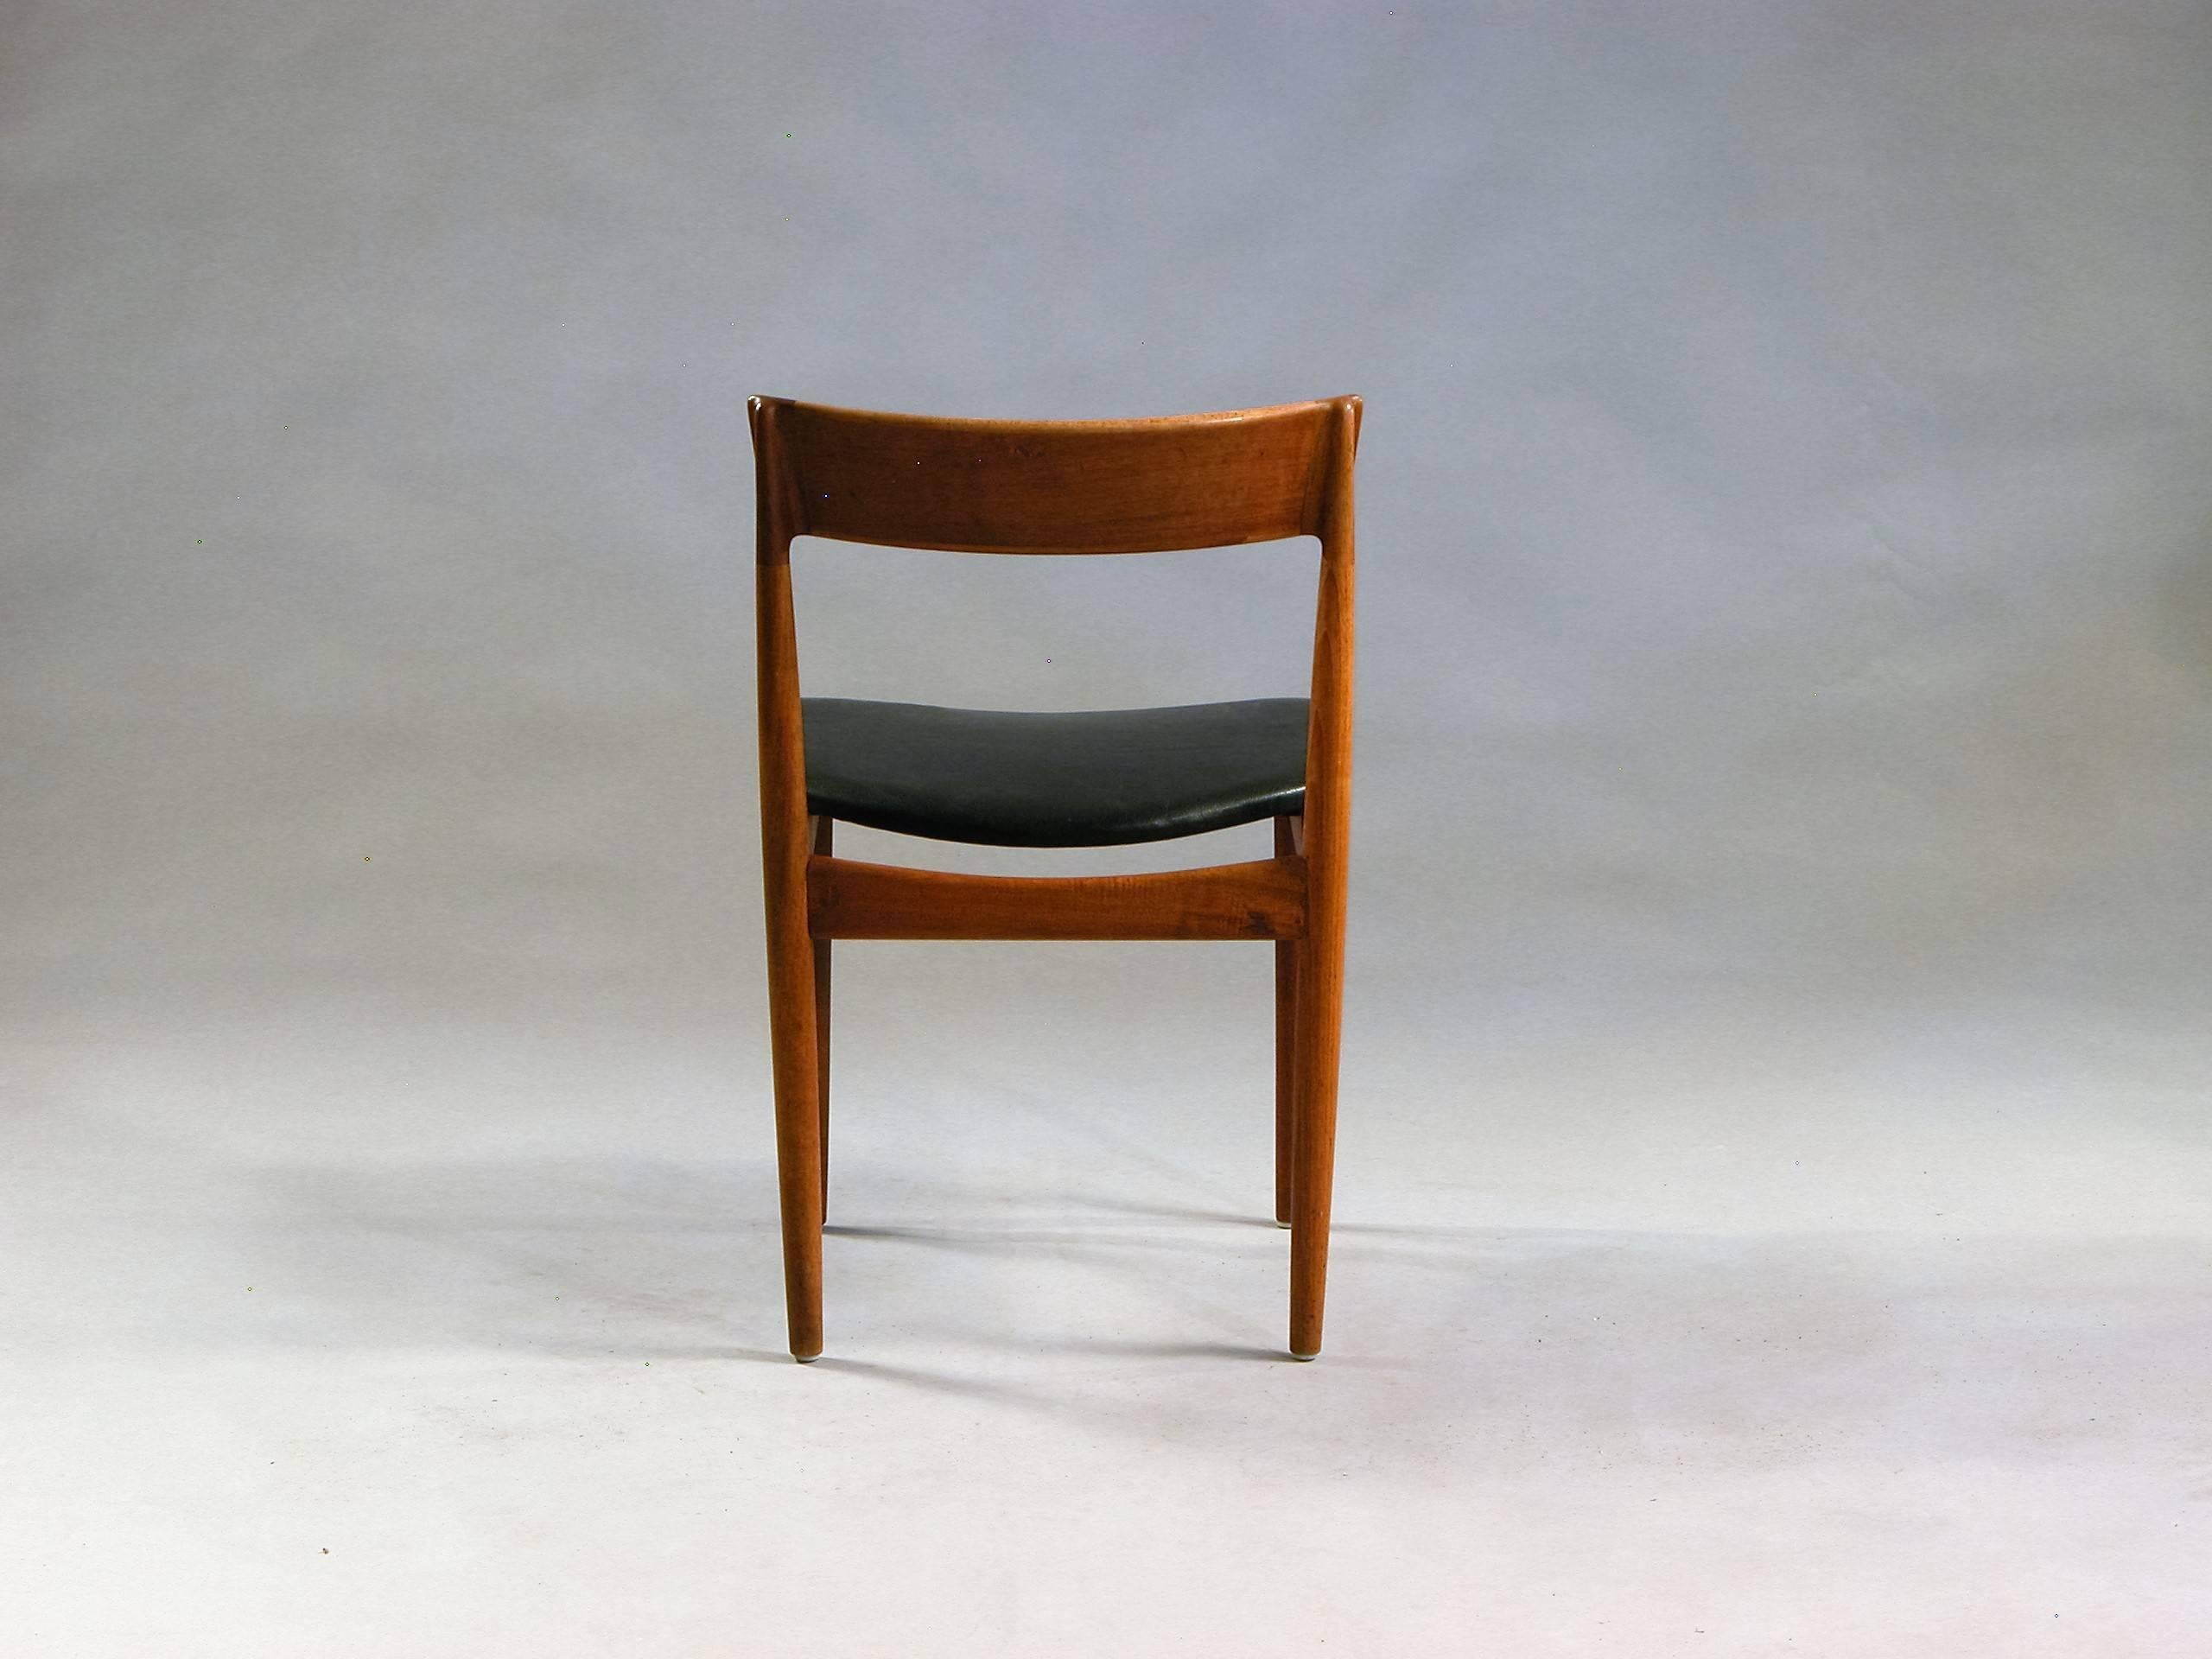 Hand-Crafted 1960s Henry Rosengren Hansen Model 39 Teak Dining Chairs in Teak and Leather